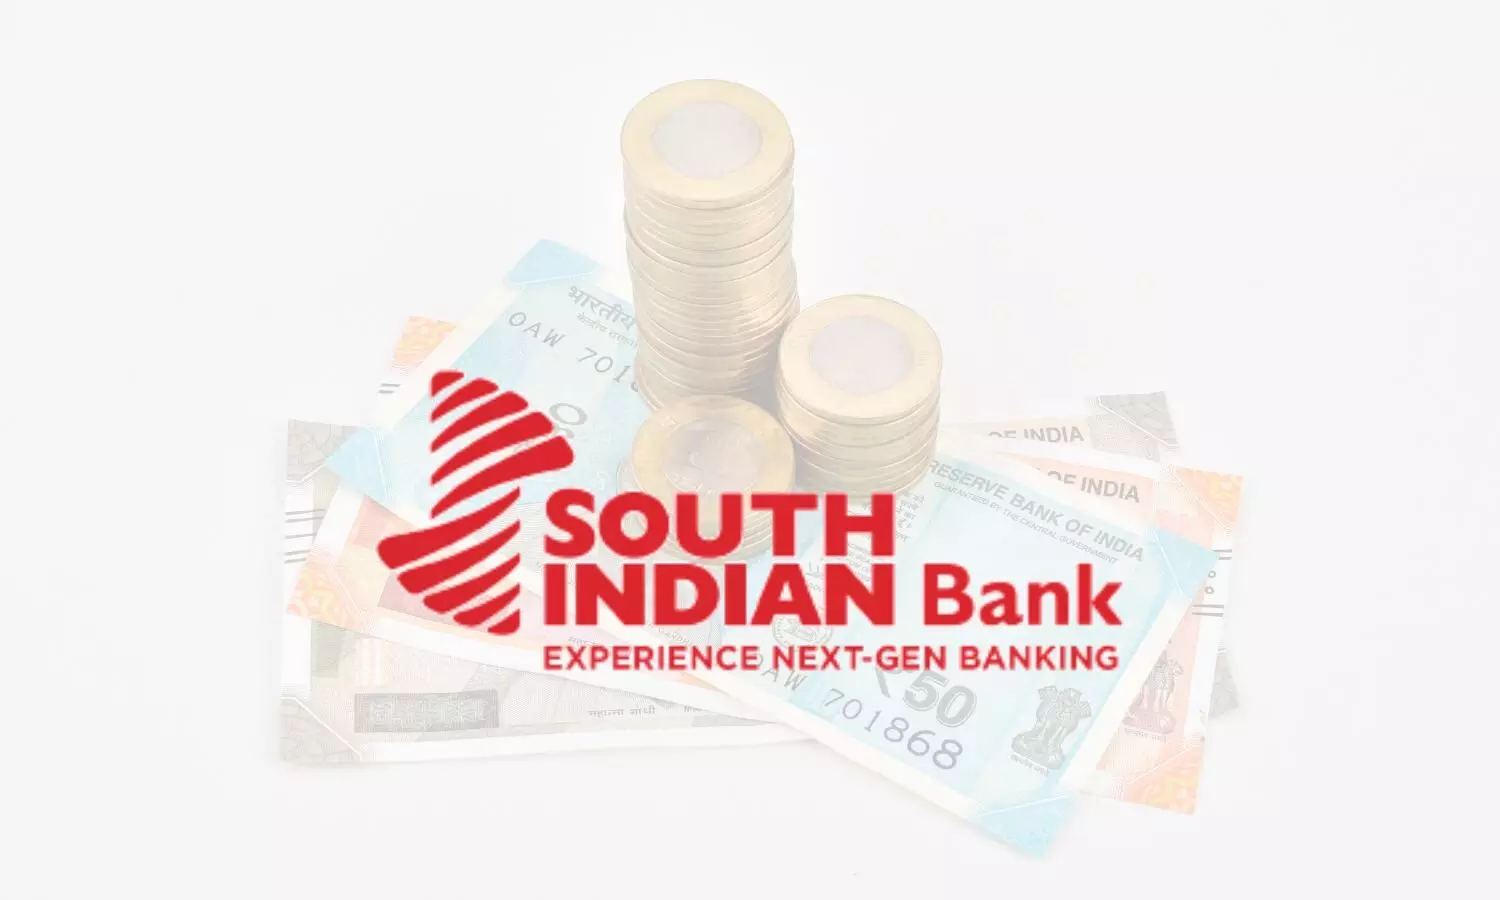 South Indian Bank Logo and Indian Rupee